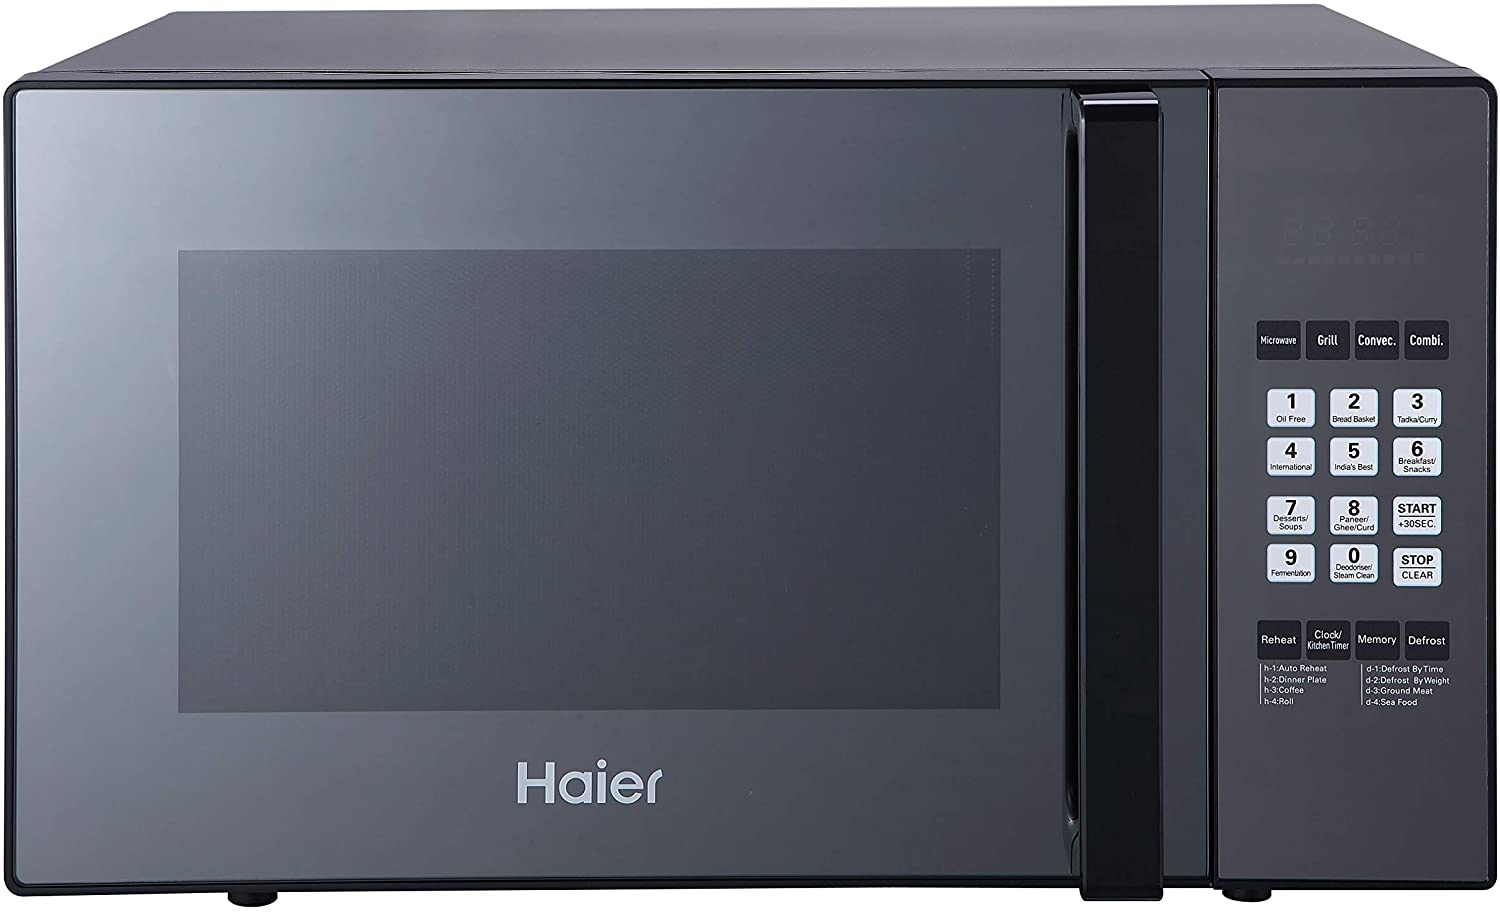 Haier 25 L Convection Microwave Oven